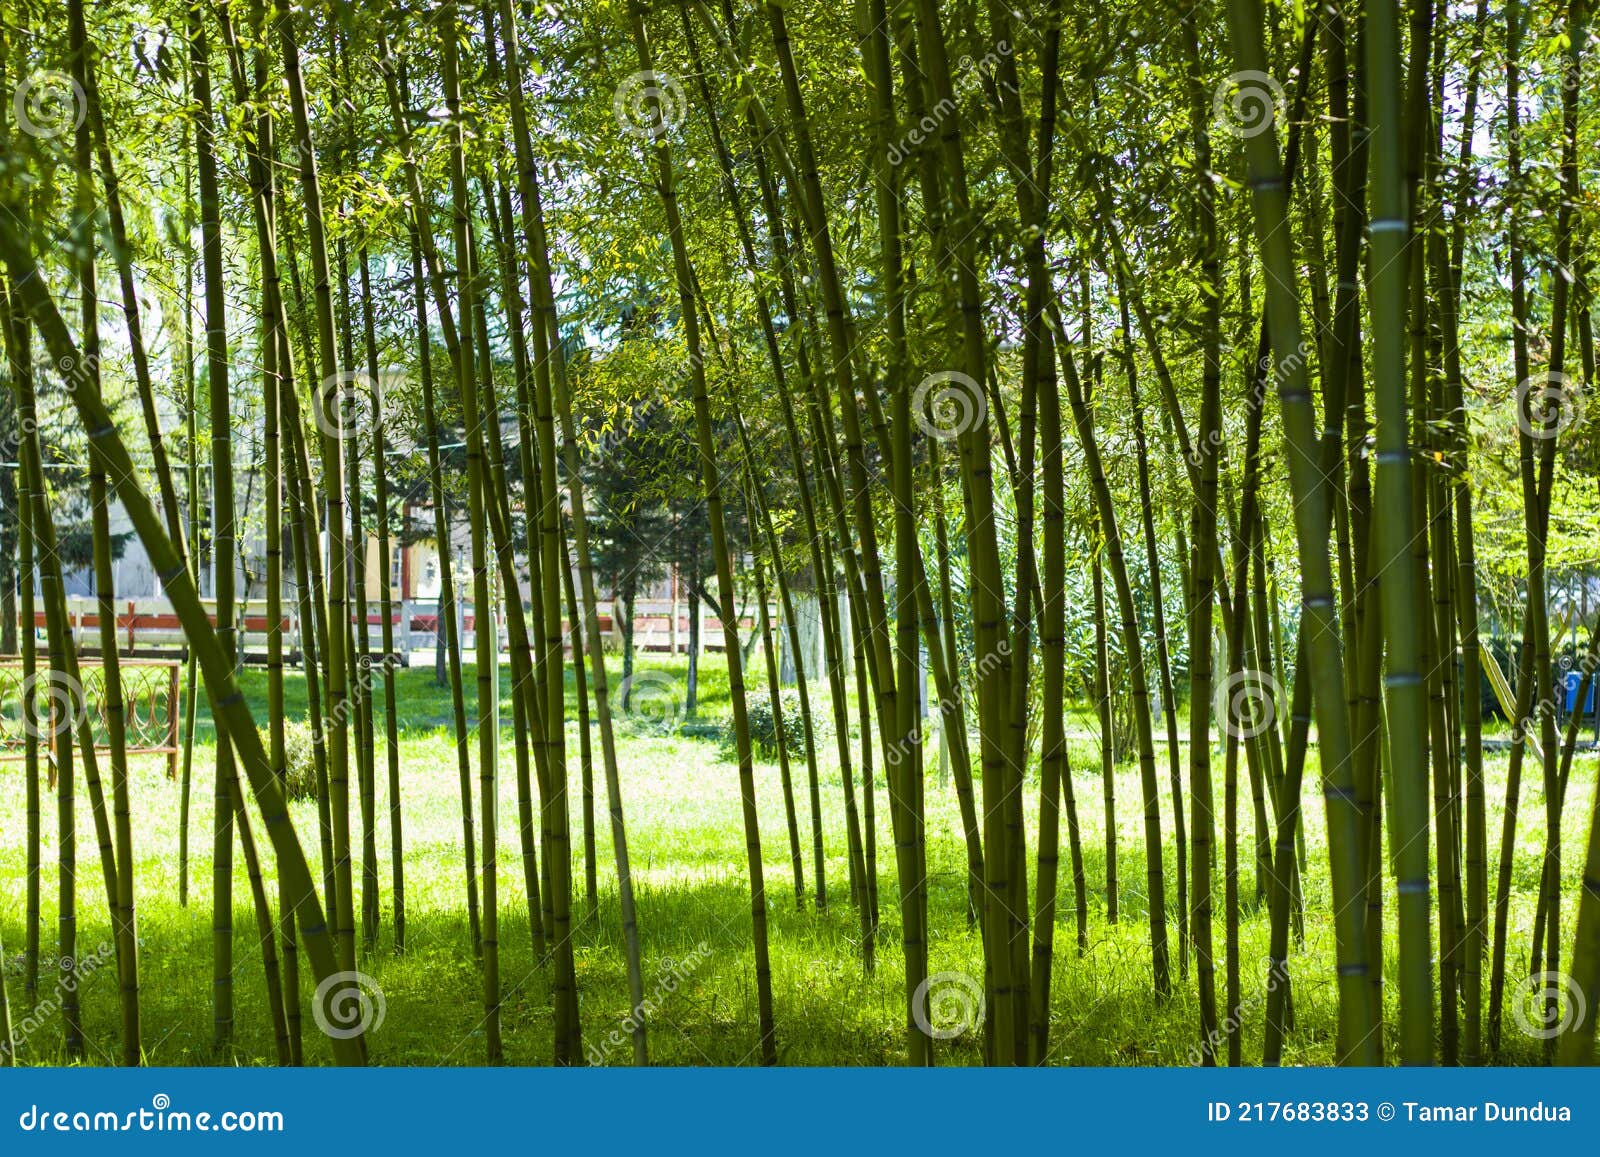 Wallpaper and Background of Nature, Bamboo Trees in Garden Stock Image -  Image of foliage, colorful: 217683833